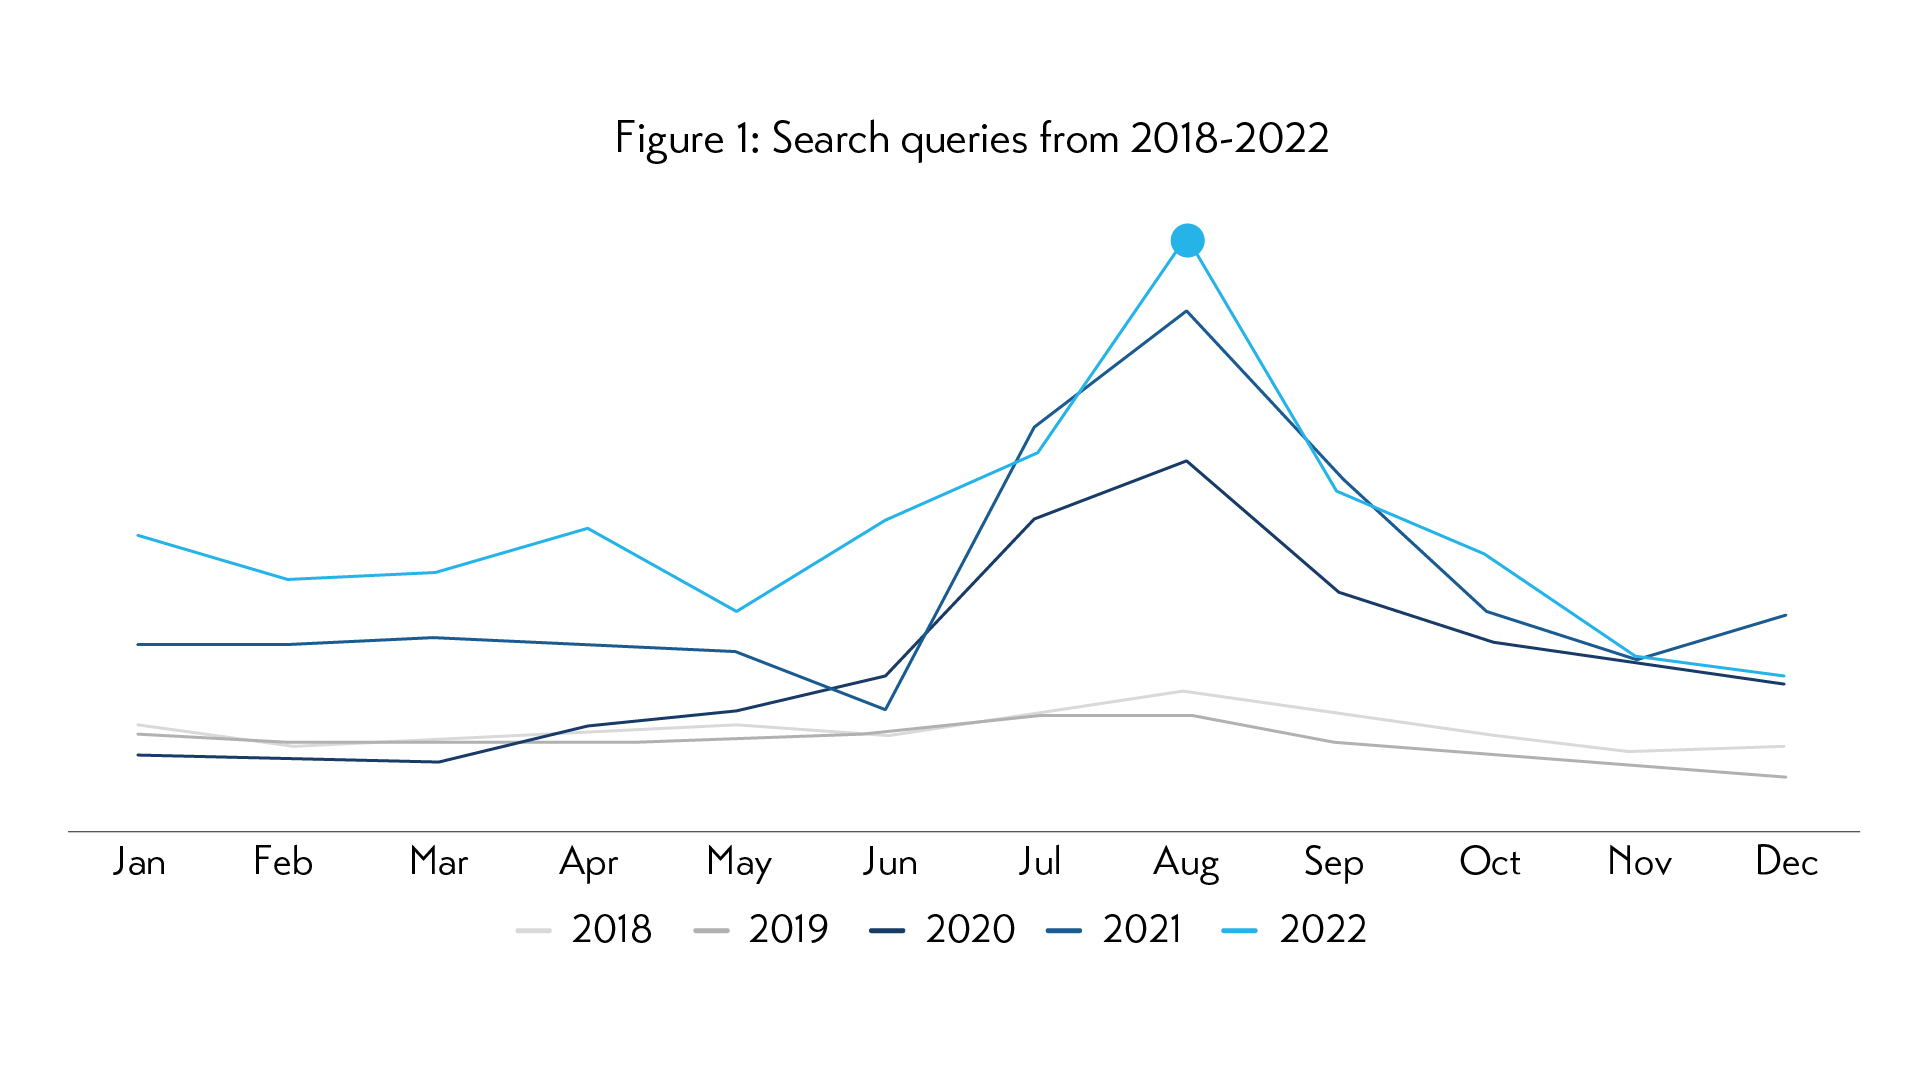 Search queries from 2018-2022